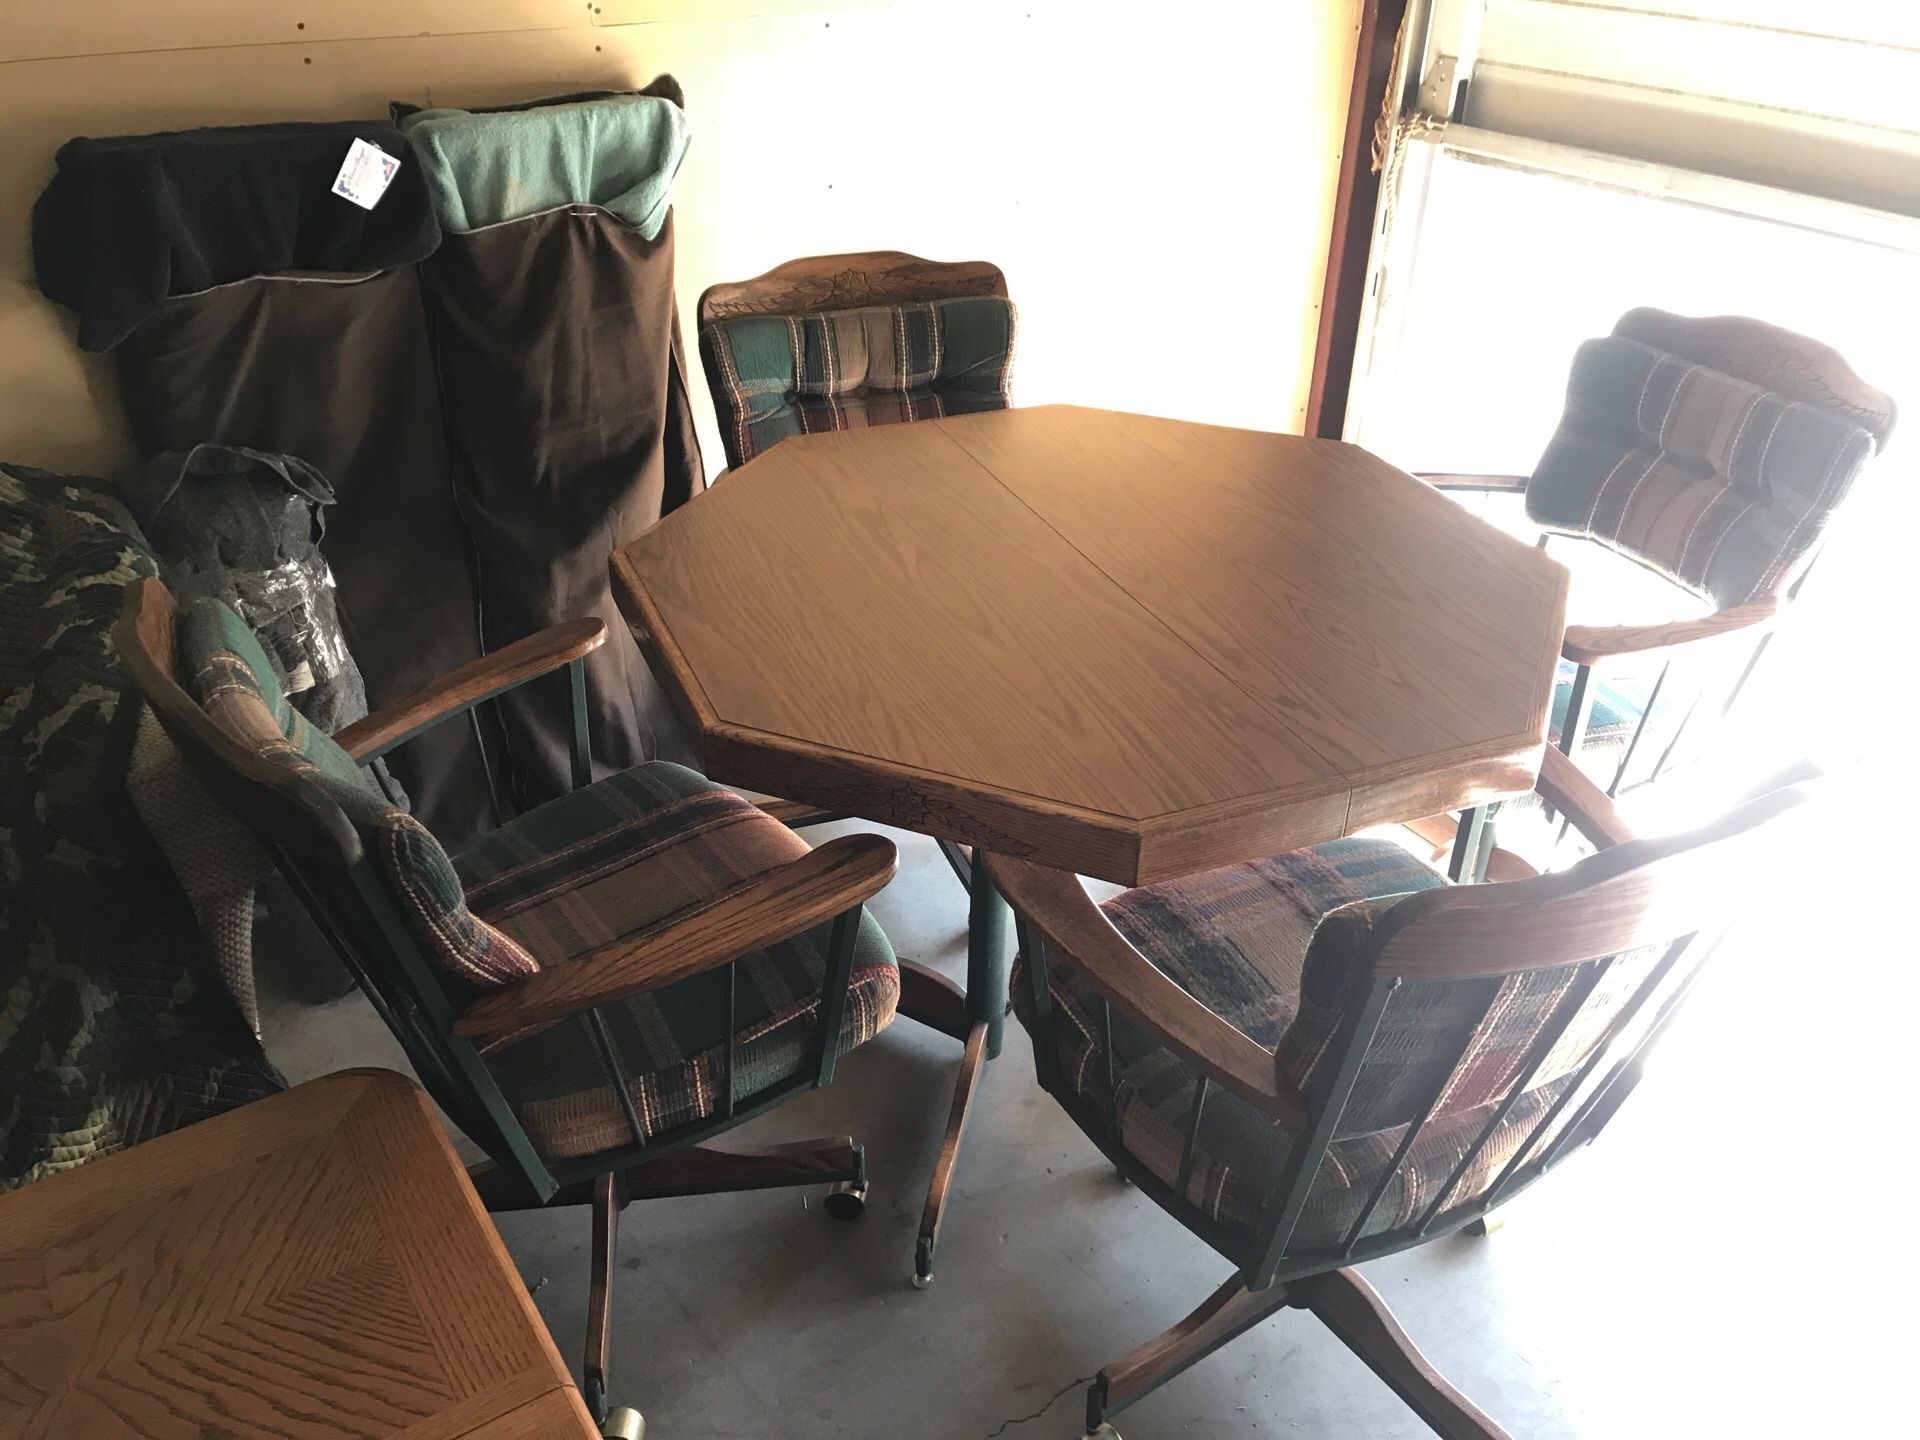 Breakfast Dining Table w chairs that are on wheels and swivel